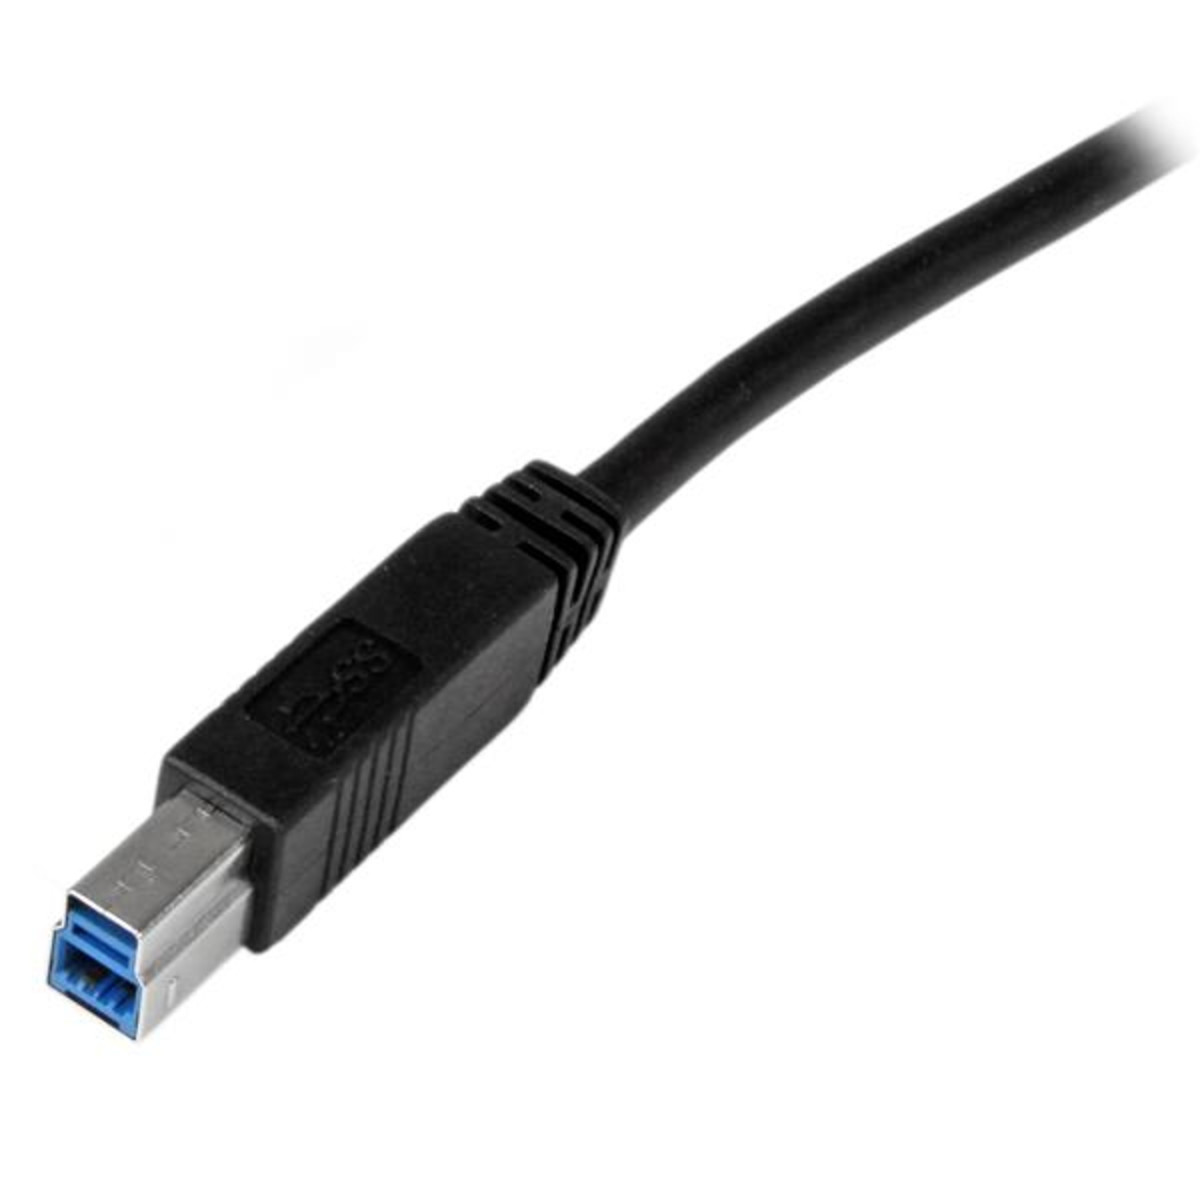 2m SS USB 3.0 A to B Cable